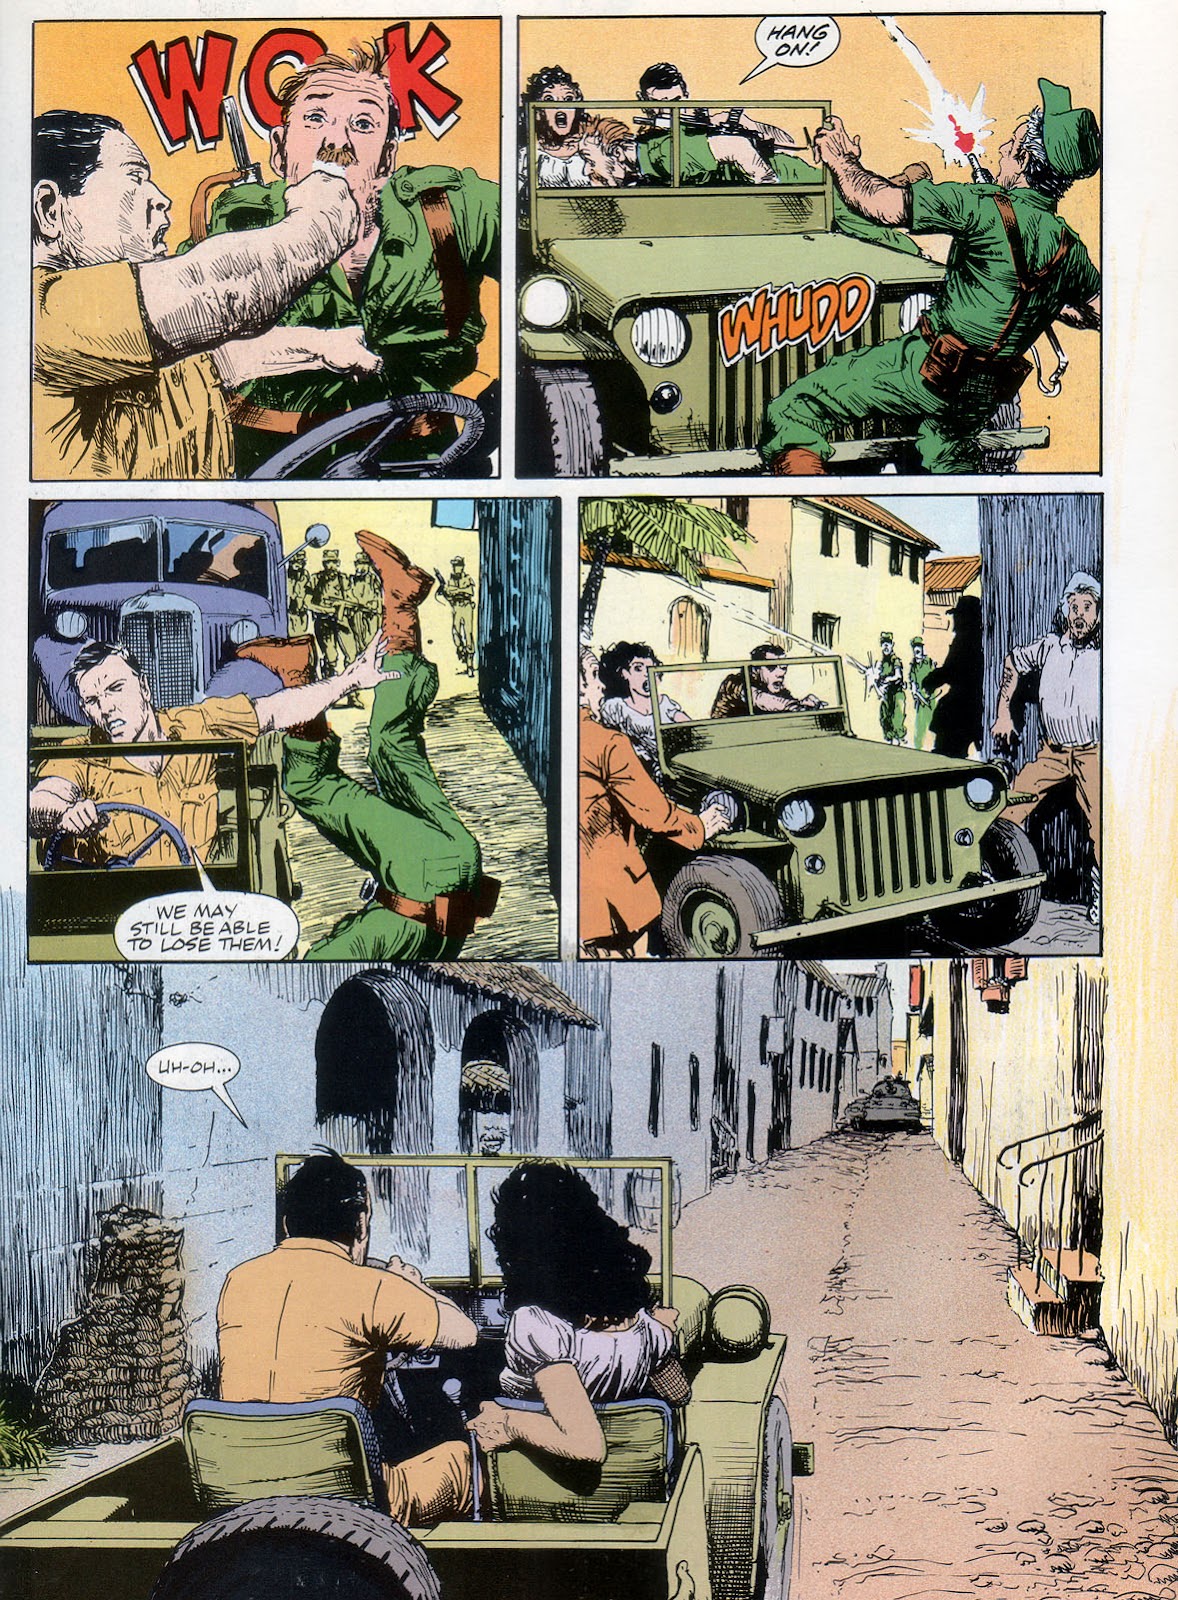 Marvel Graphic Novel issue 57 - Rick Mason - The Agent - Page 51